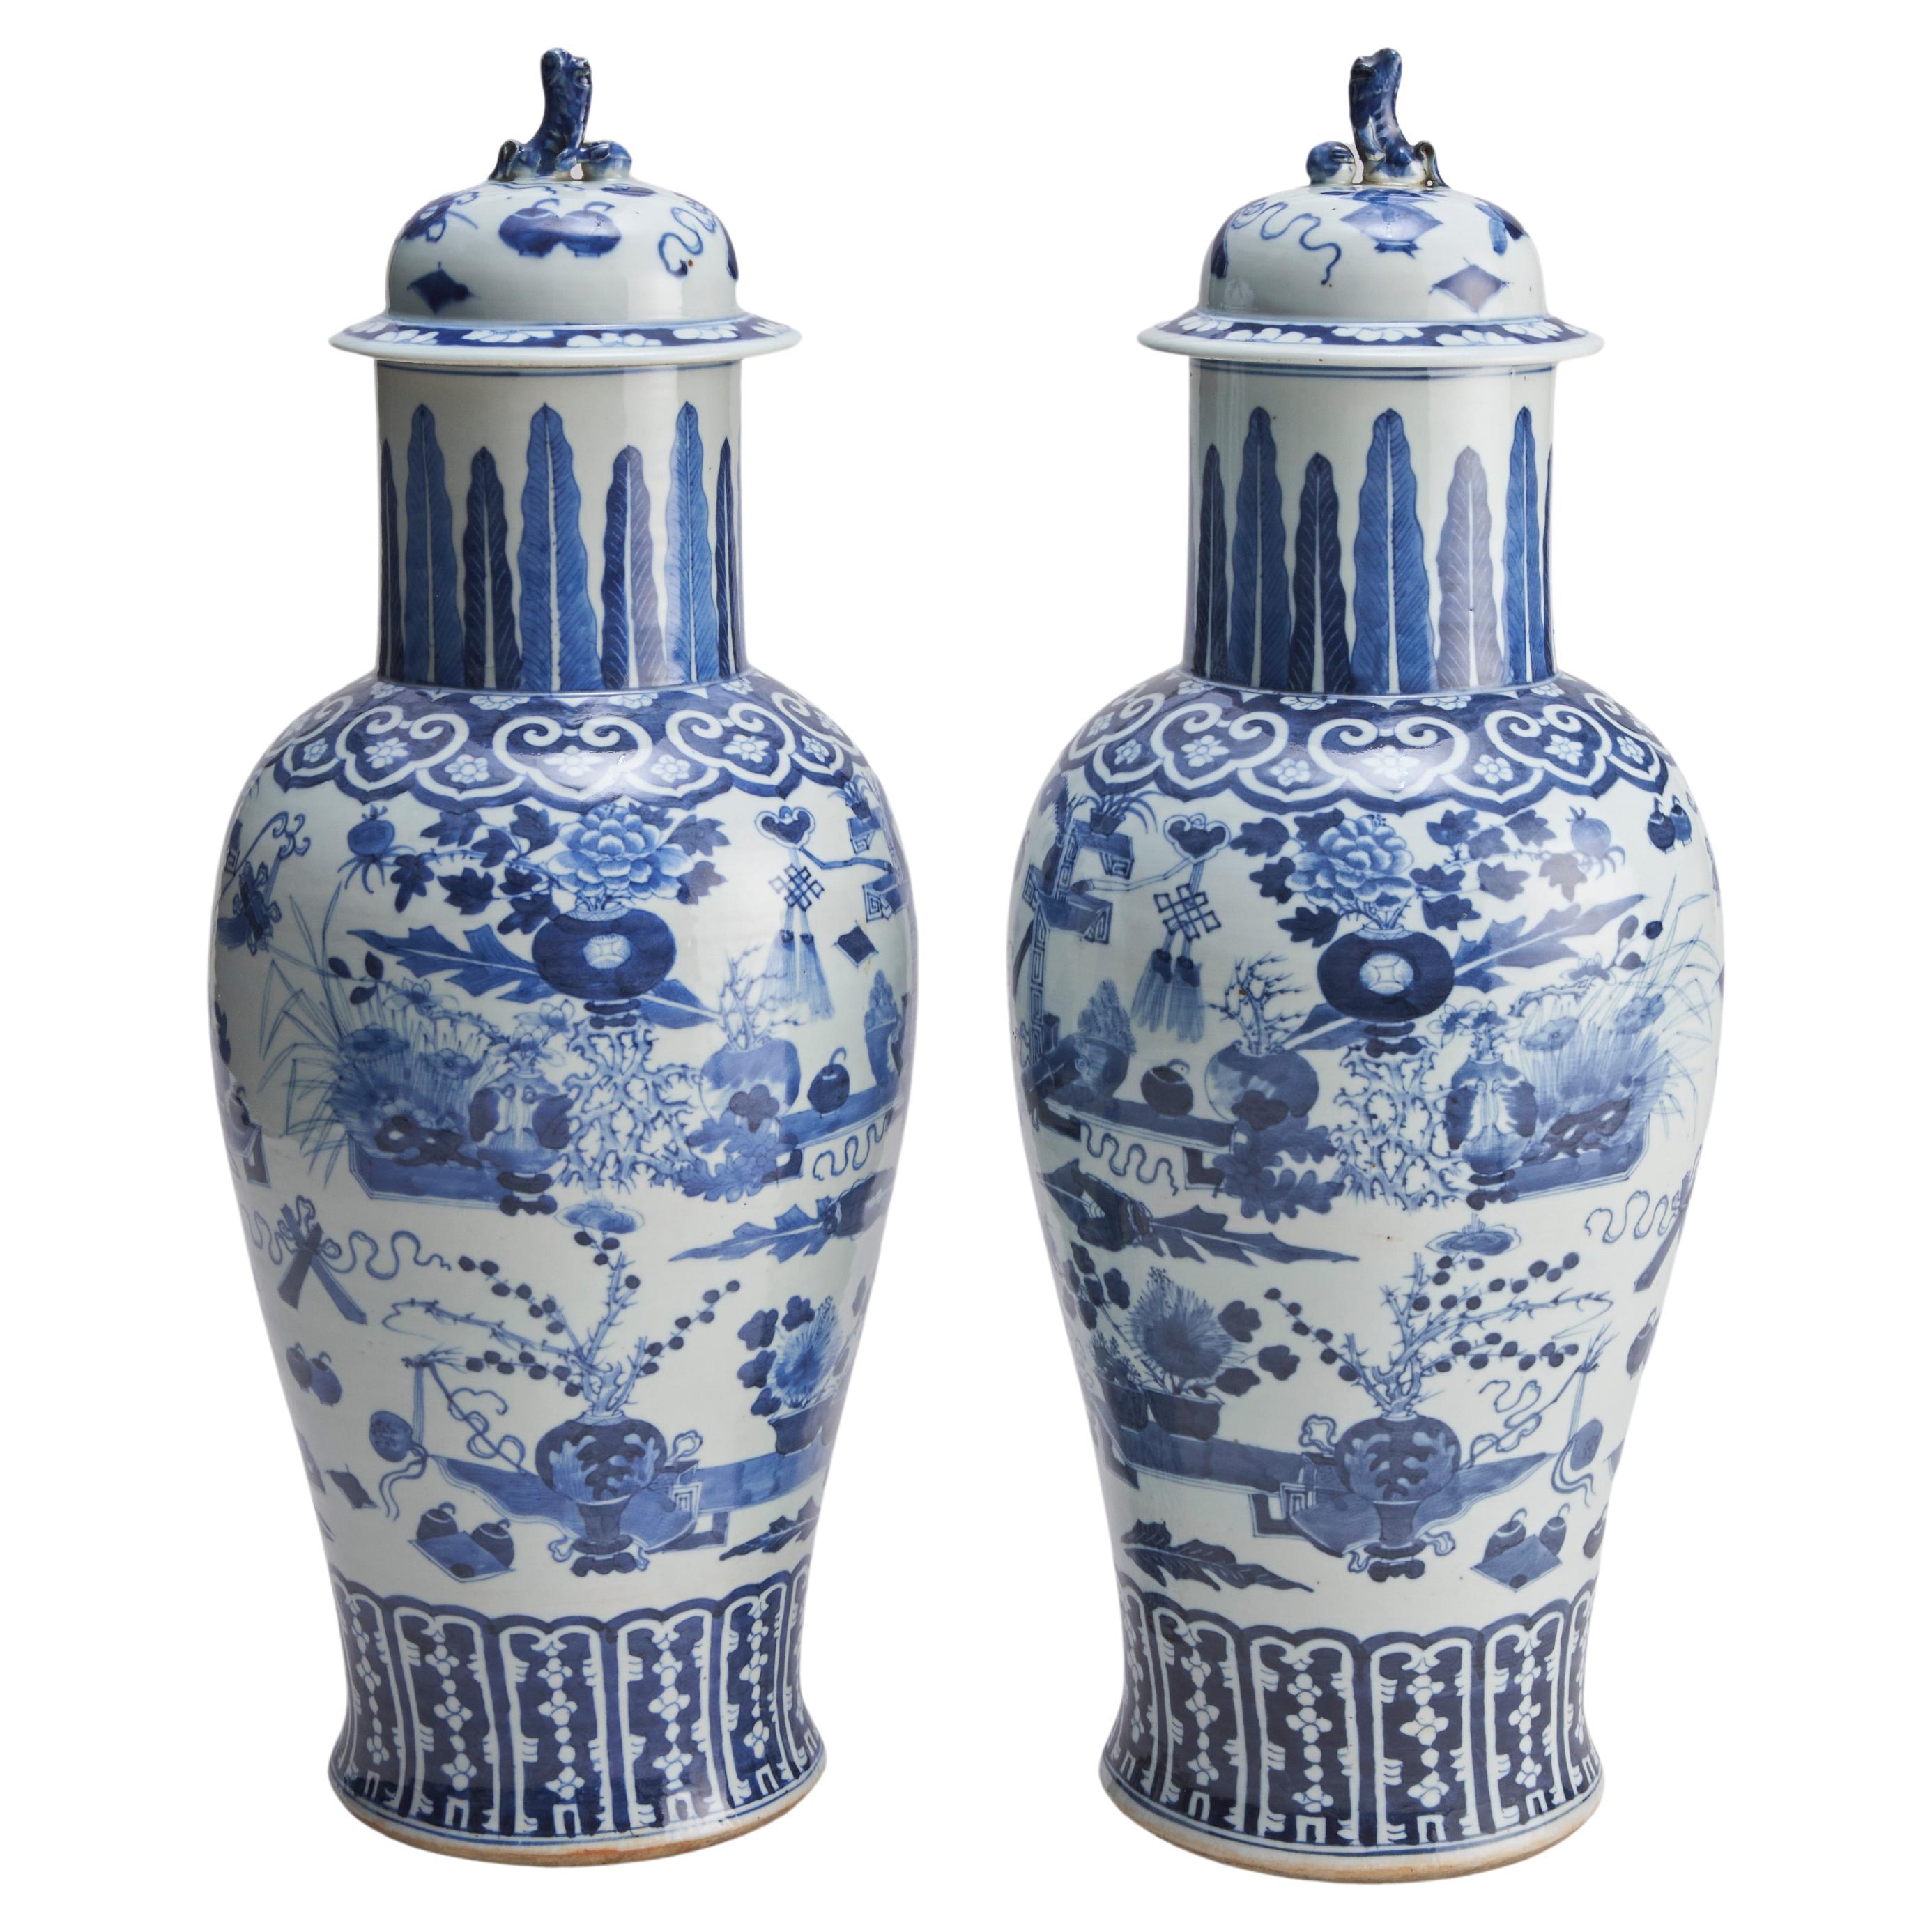 An impressive pair of Chinese porcelain blue and white covered vases